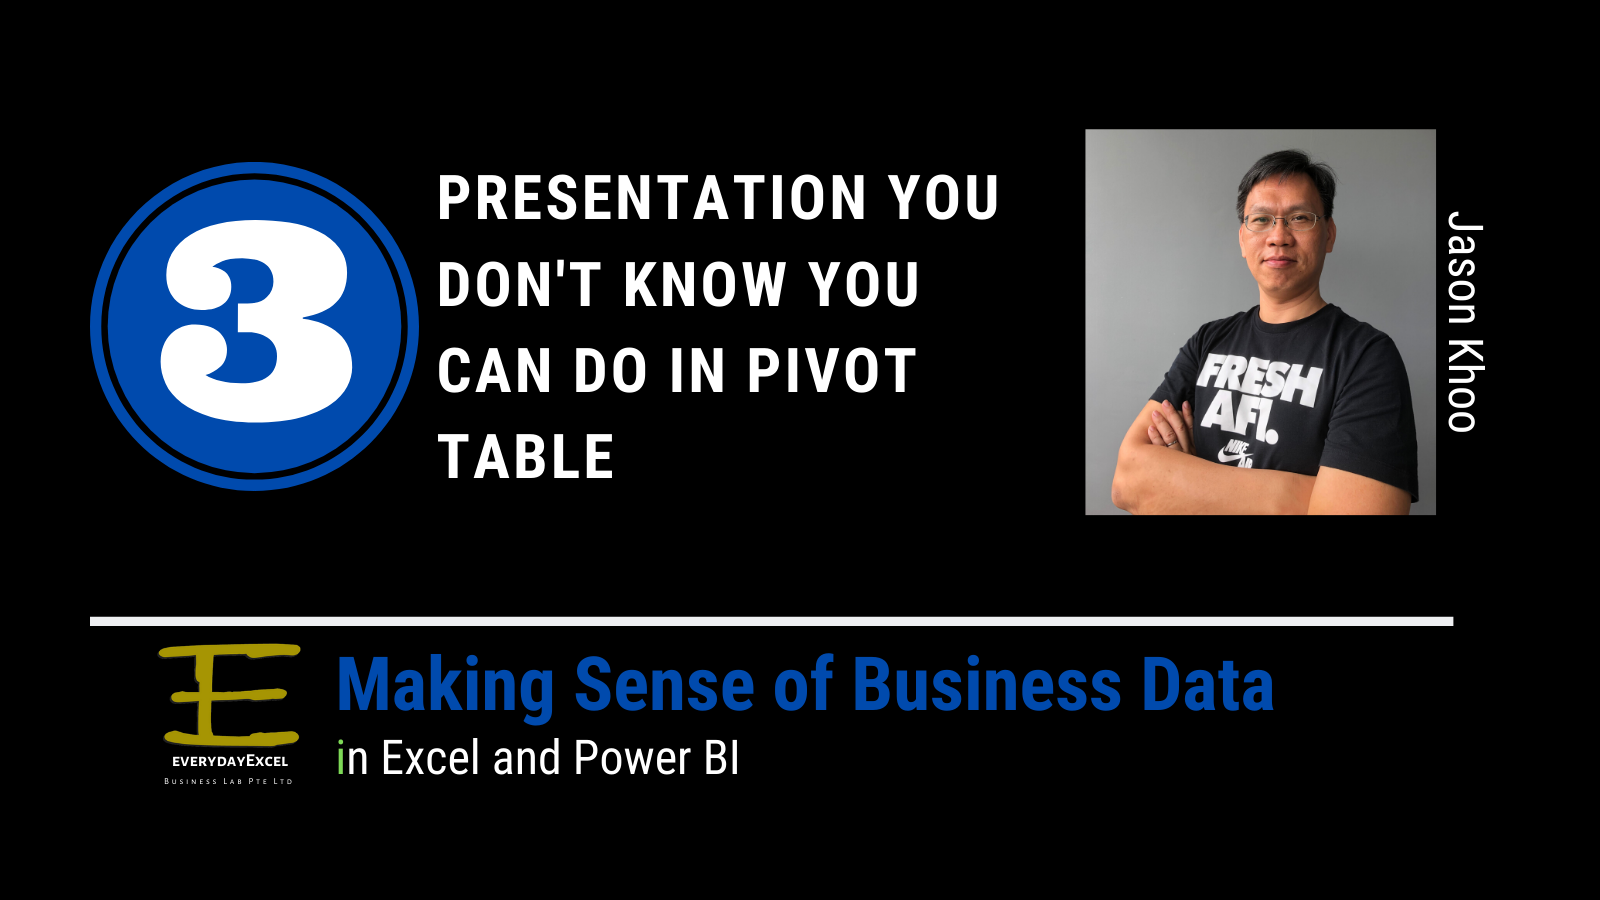 3 presentation you don't know you can do in Pivot Table